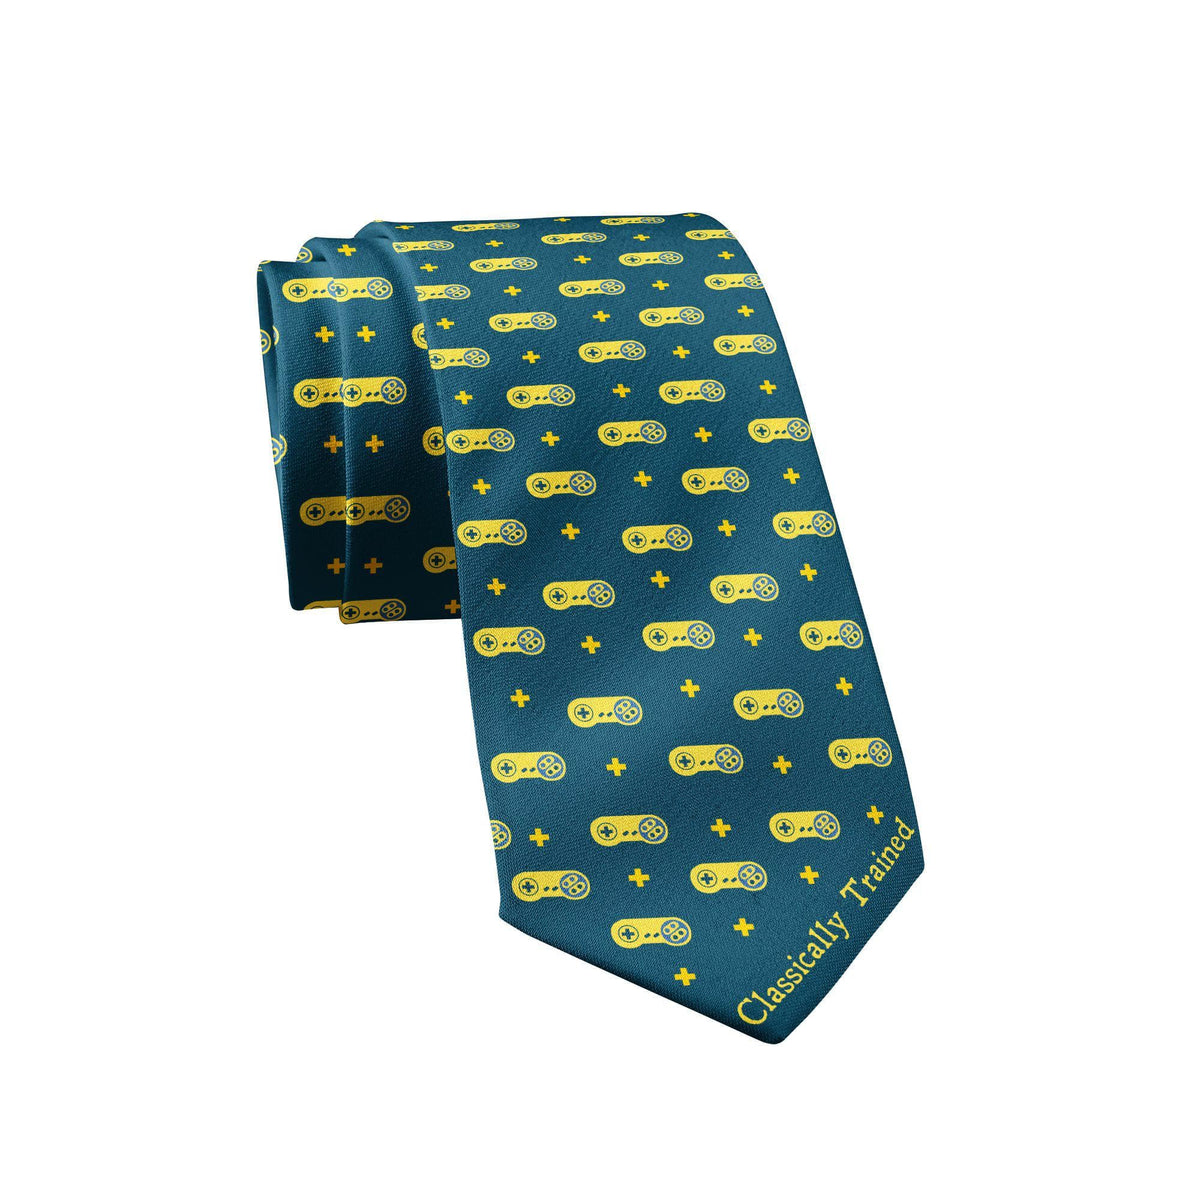 Classically Trained Neck Tie - Crazy Dog T-Shirts